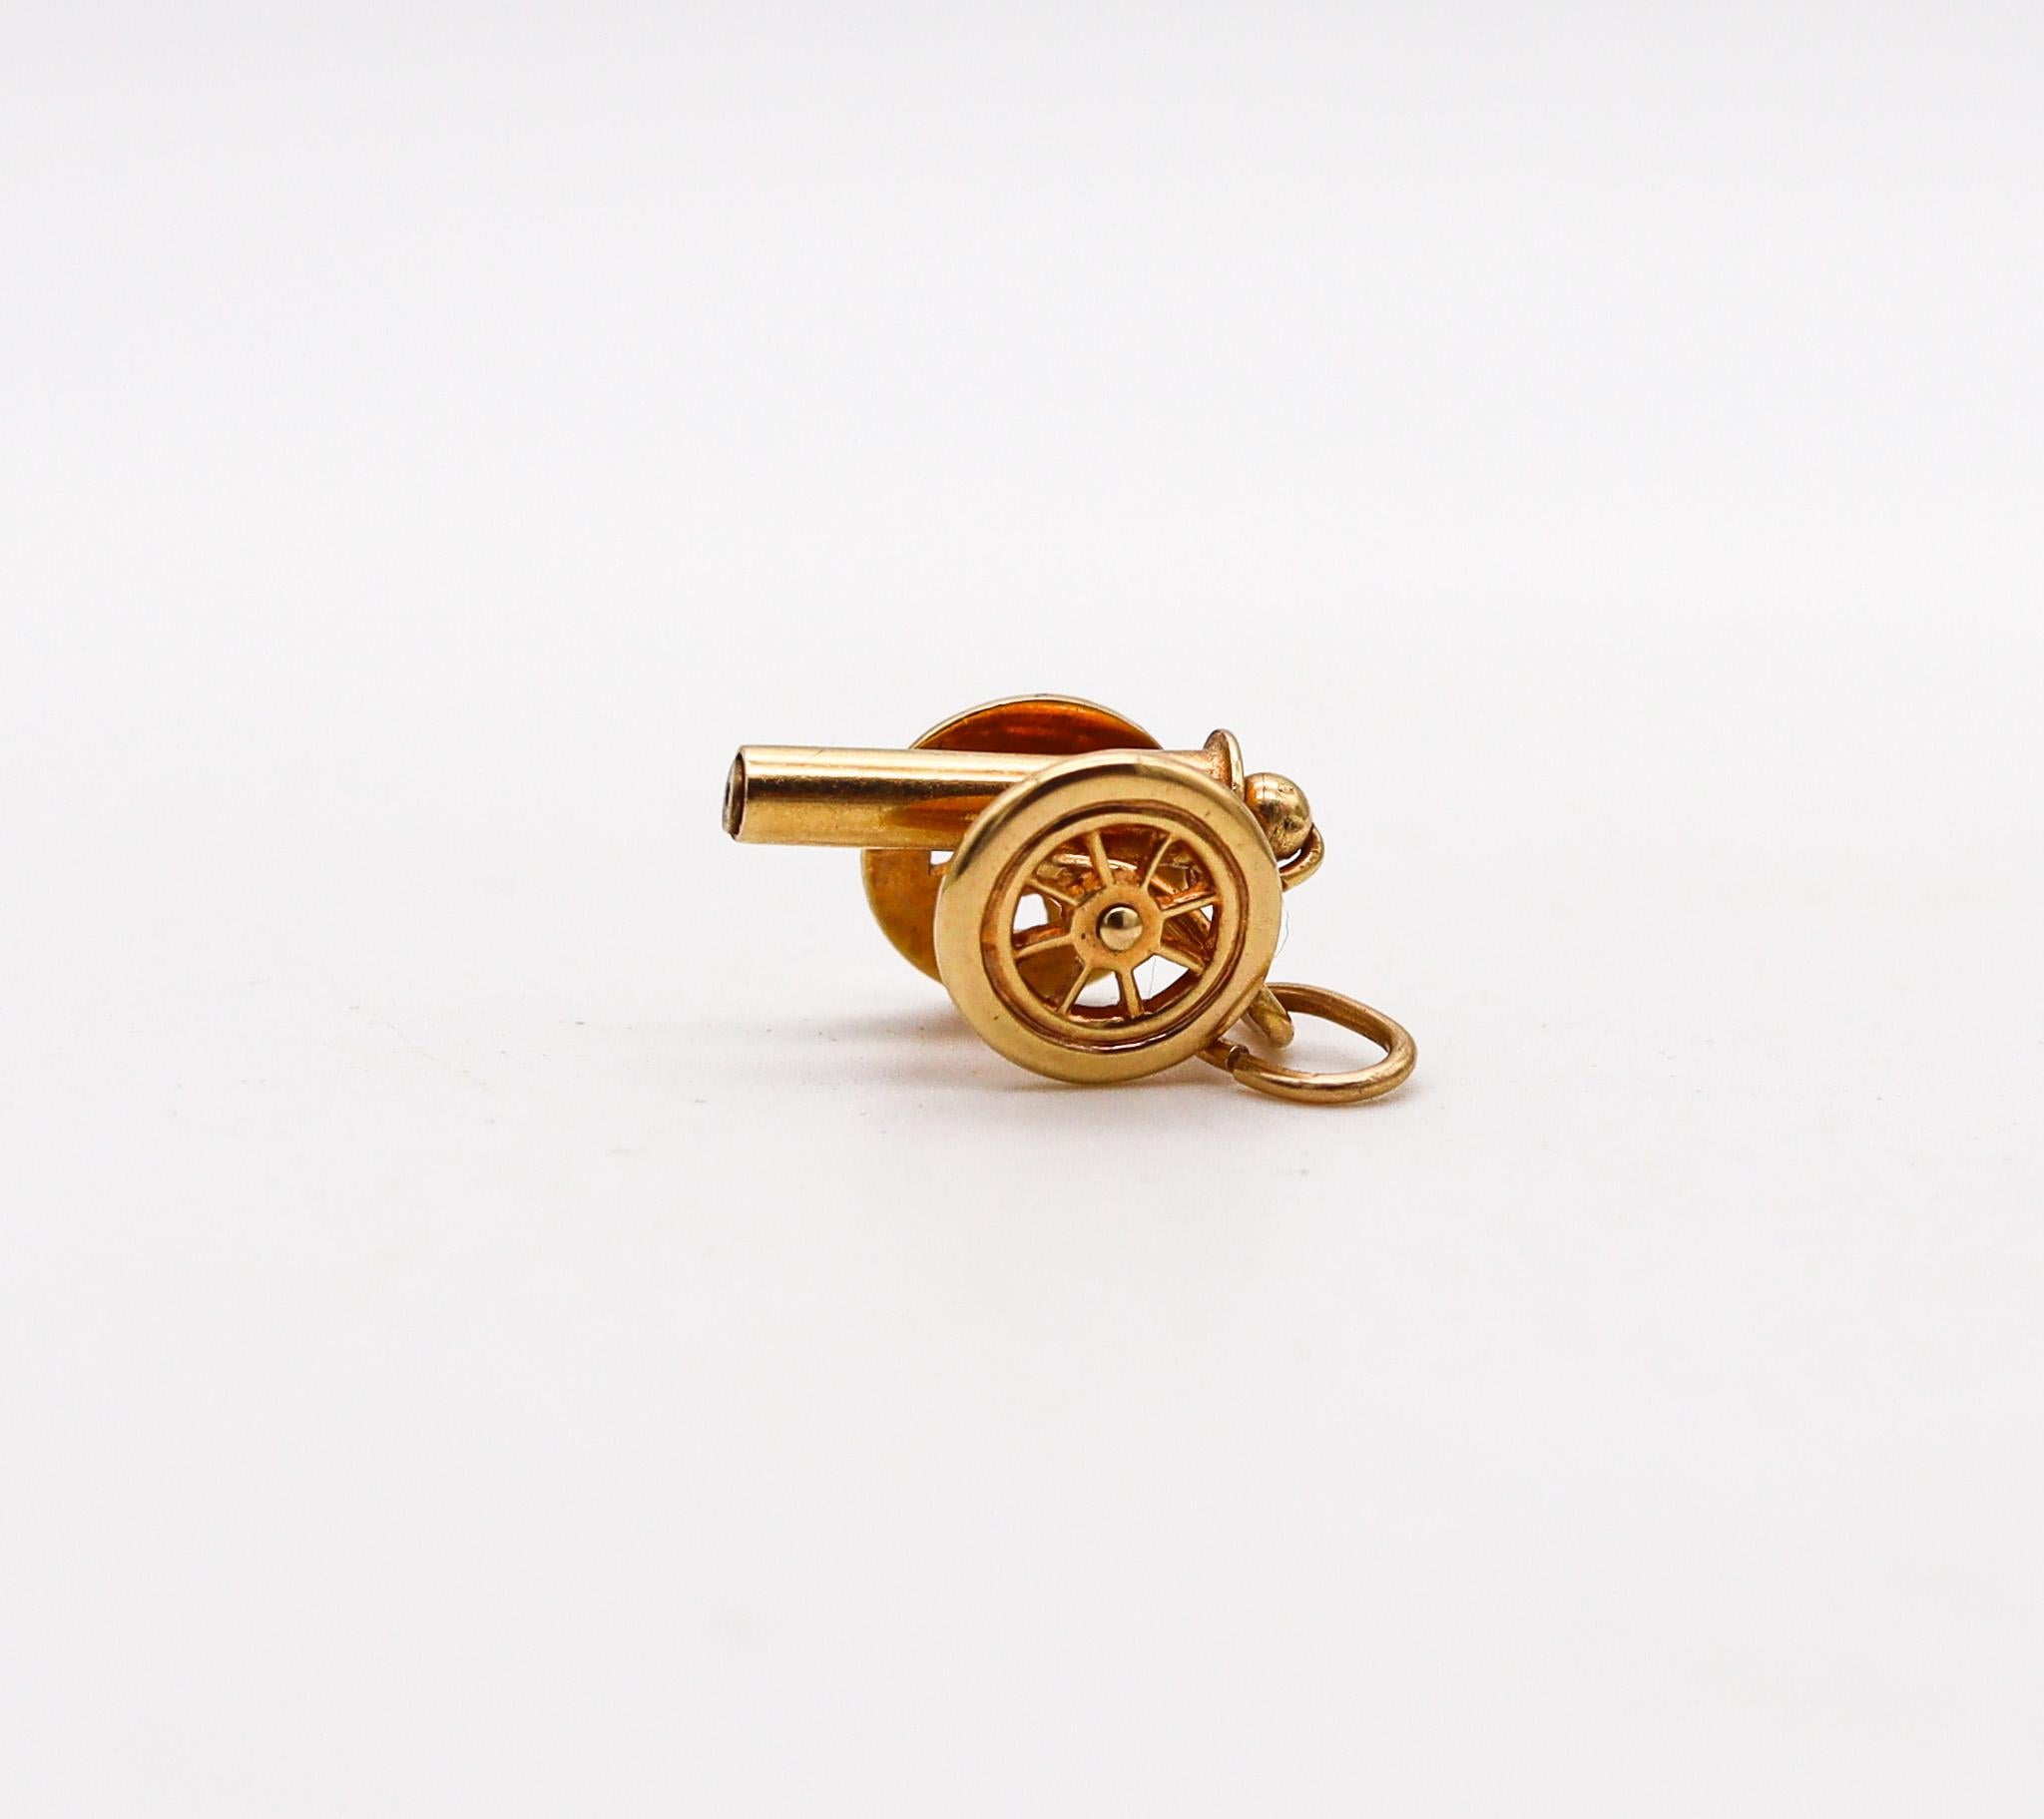 American 1935 Dreco Retro Charm in the Shape of a CANNON In 14Kt Yellow Gold In Good Condition For Sale In Miami, FL